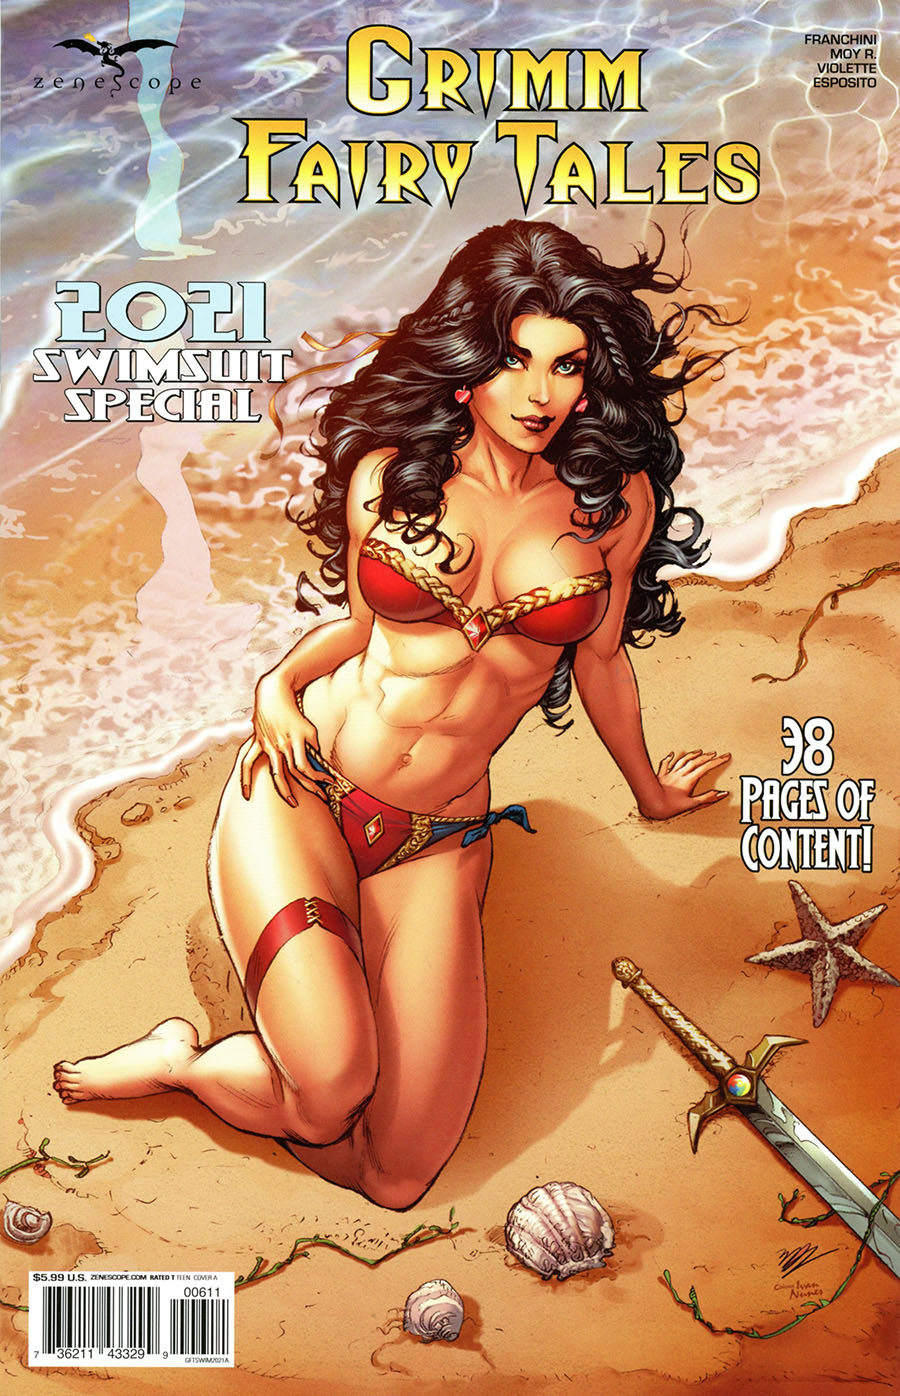 Grimm Fairy Tales Presents Swimsuit Special 2021 #1 (One Shot) Cover A Michael Dooney